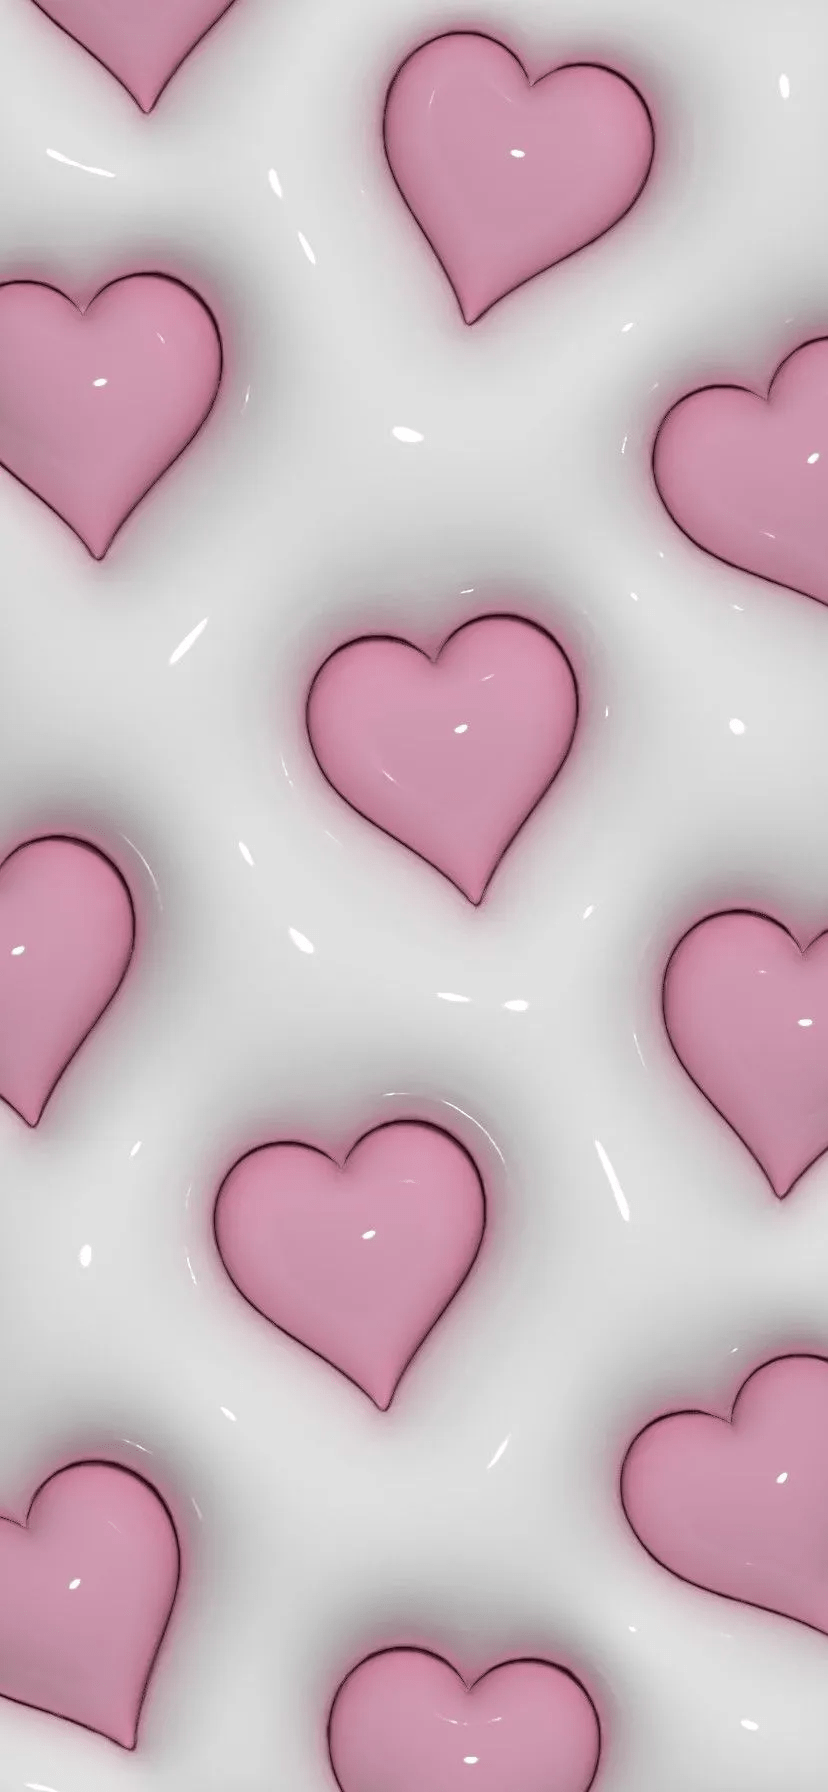 Really Cute 3D Aesthetic Wallpaper For Your Phone!. Heart iphone wallpaper, iPhone wallpaper girly, Pink wallpaper iphone